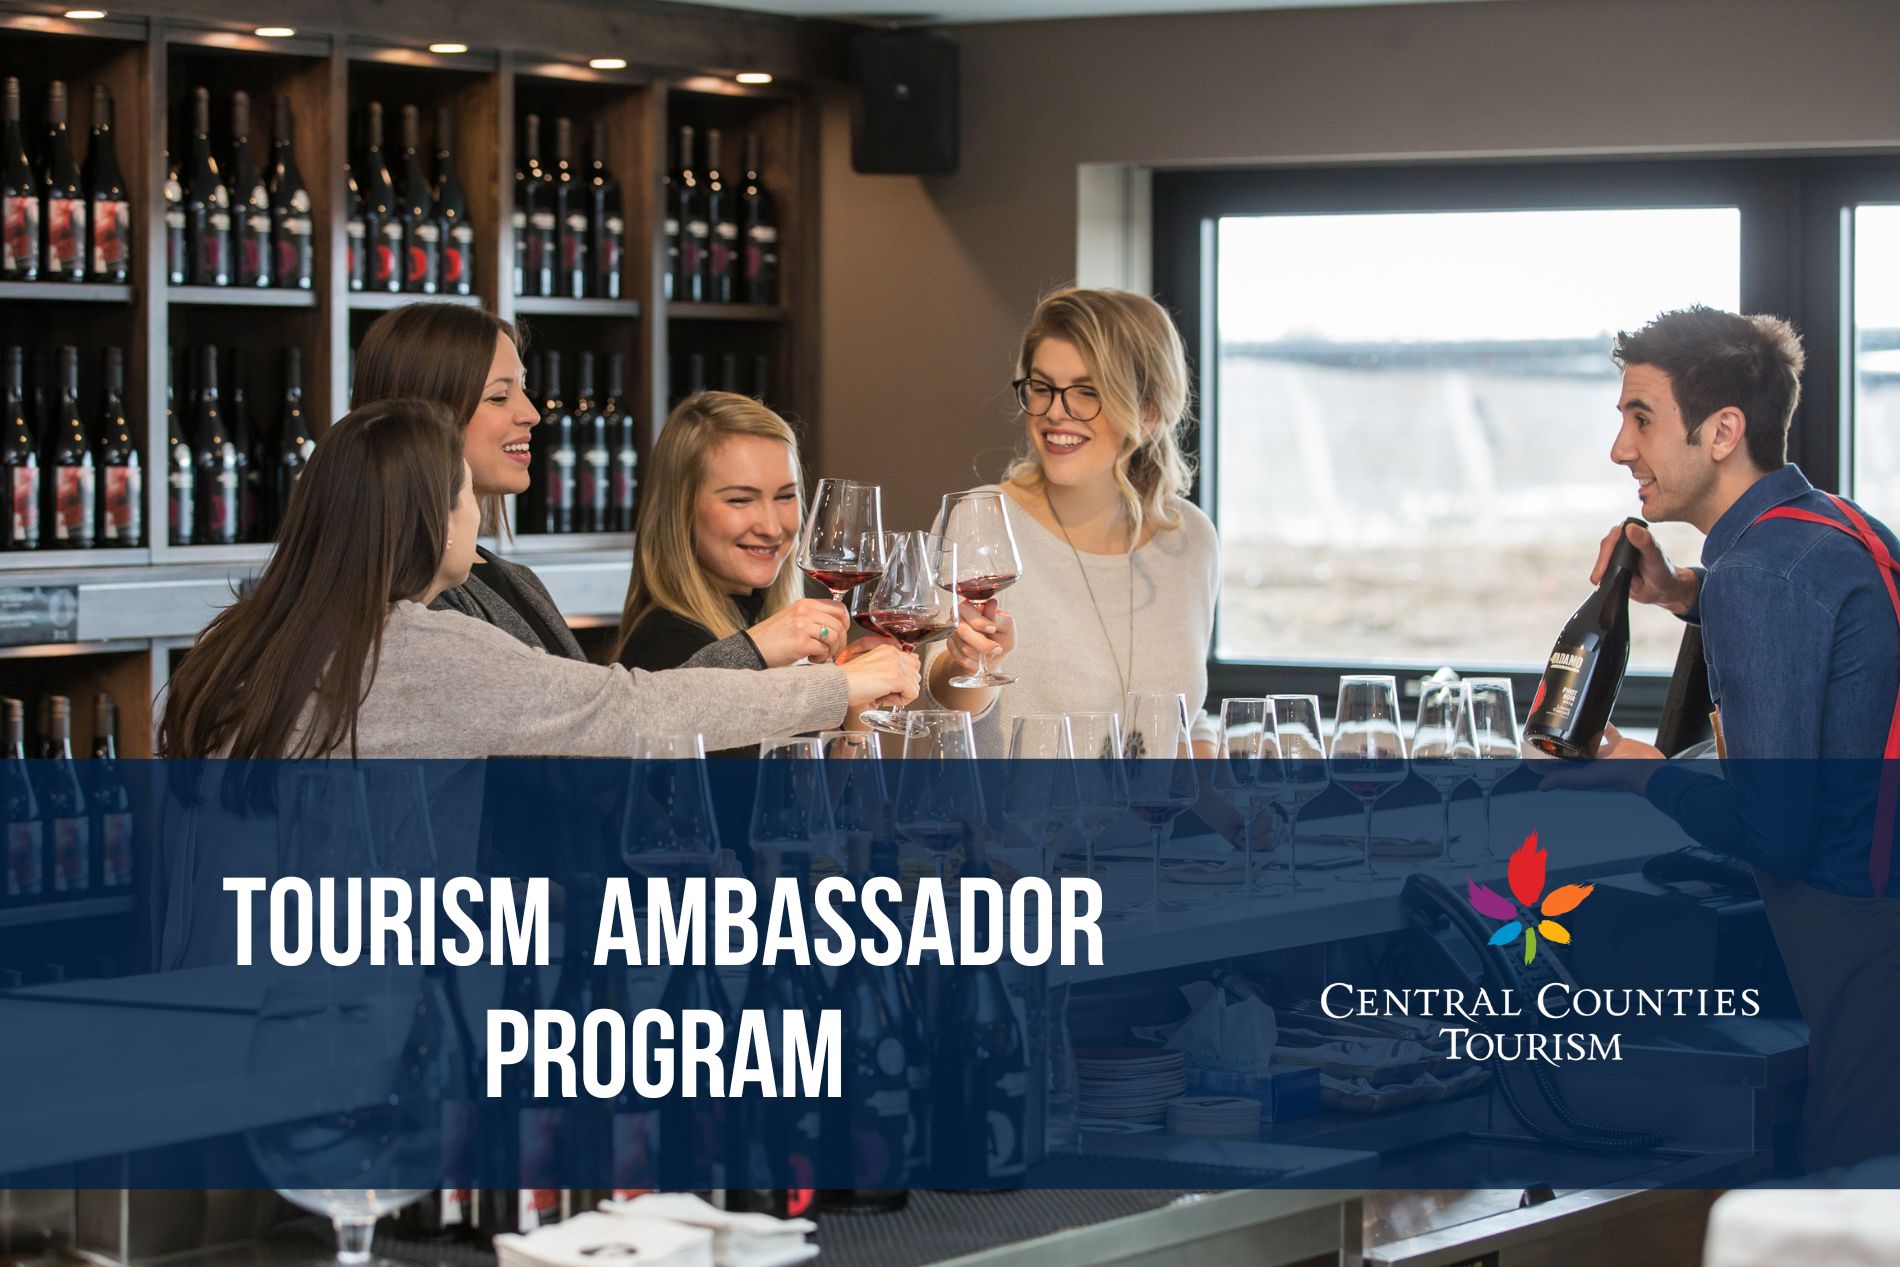 Four ladies doing a 'cheers' with glasses of wine. Ad for the Tourism Ambassador Program